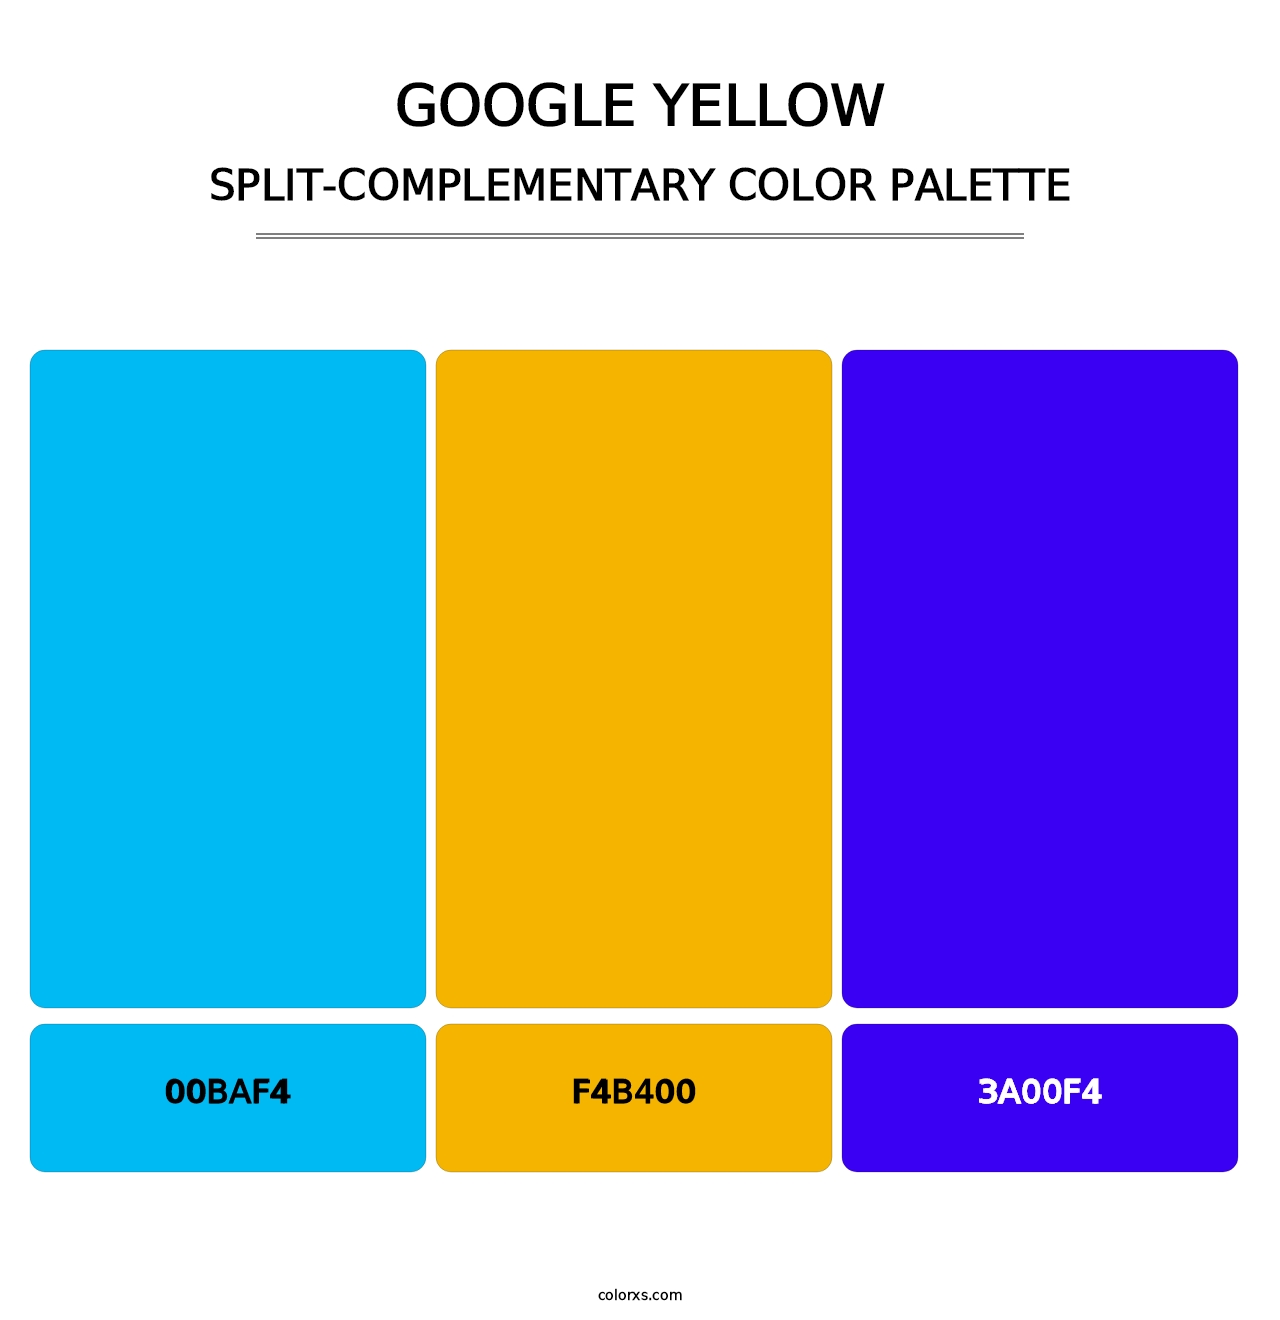 Google Yellow - Split-Complementary Color Palette